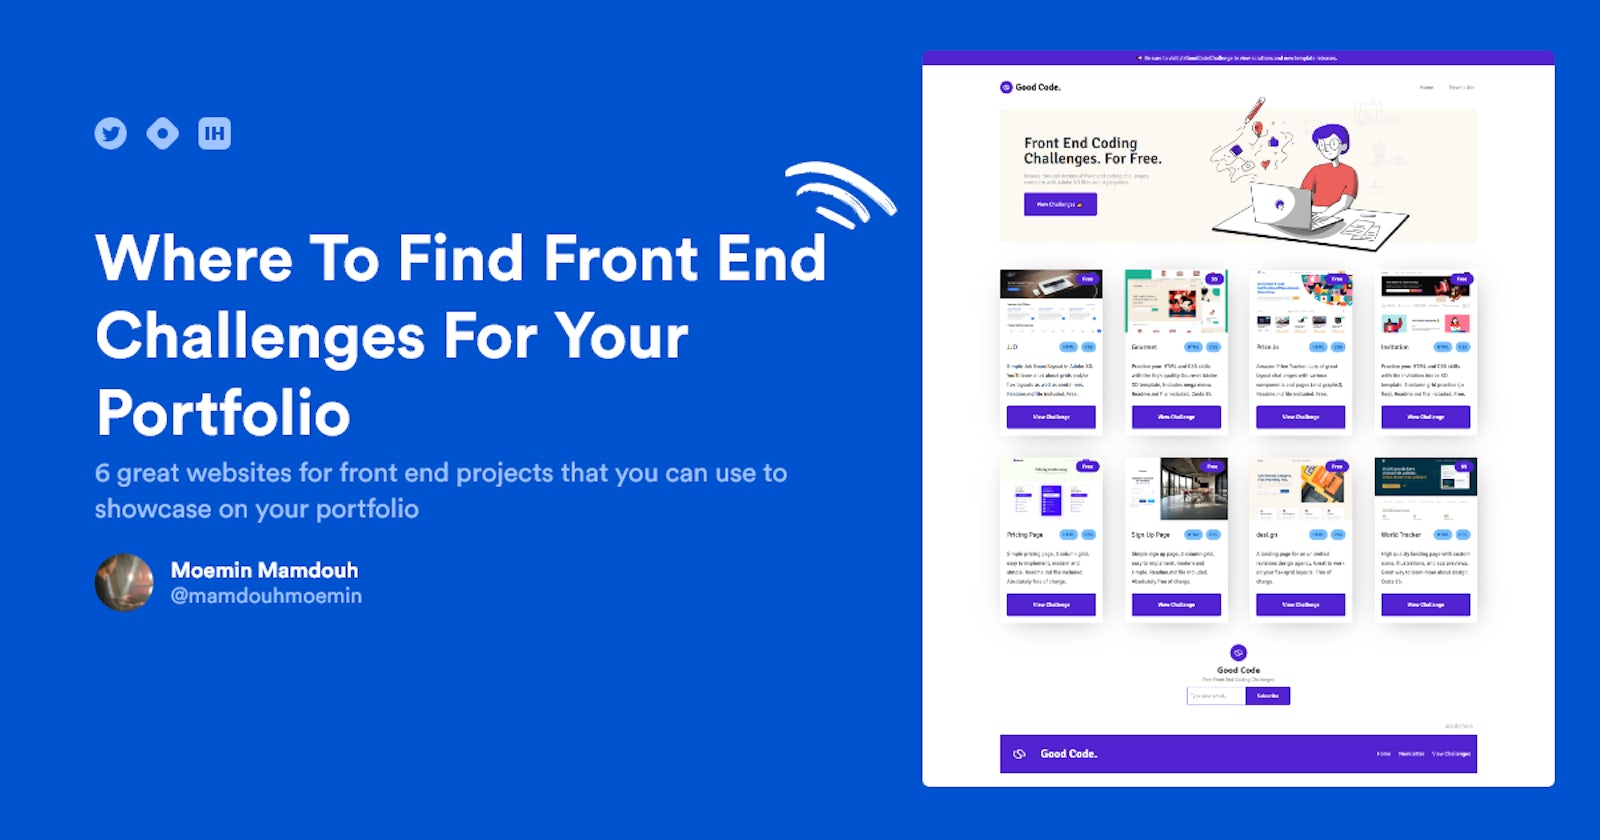 7 Websites To Find Front End Projects For Your Portfolio